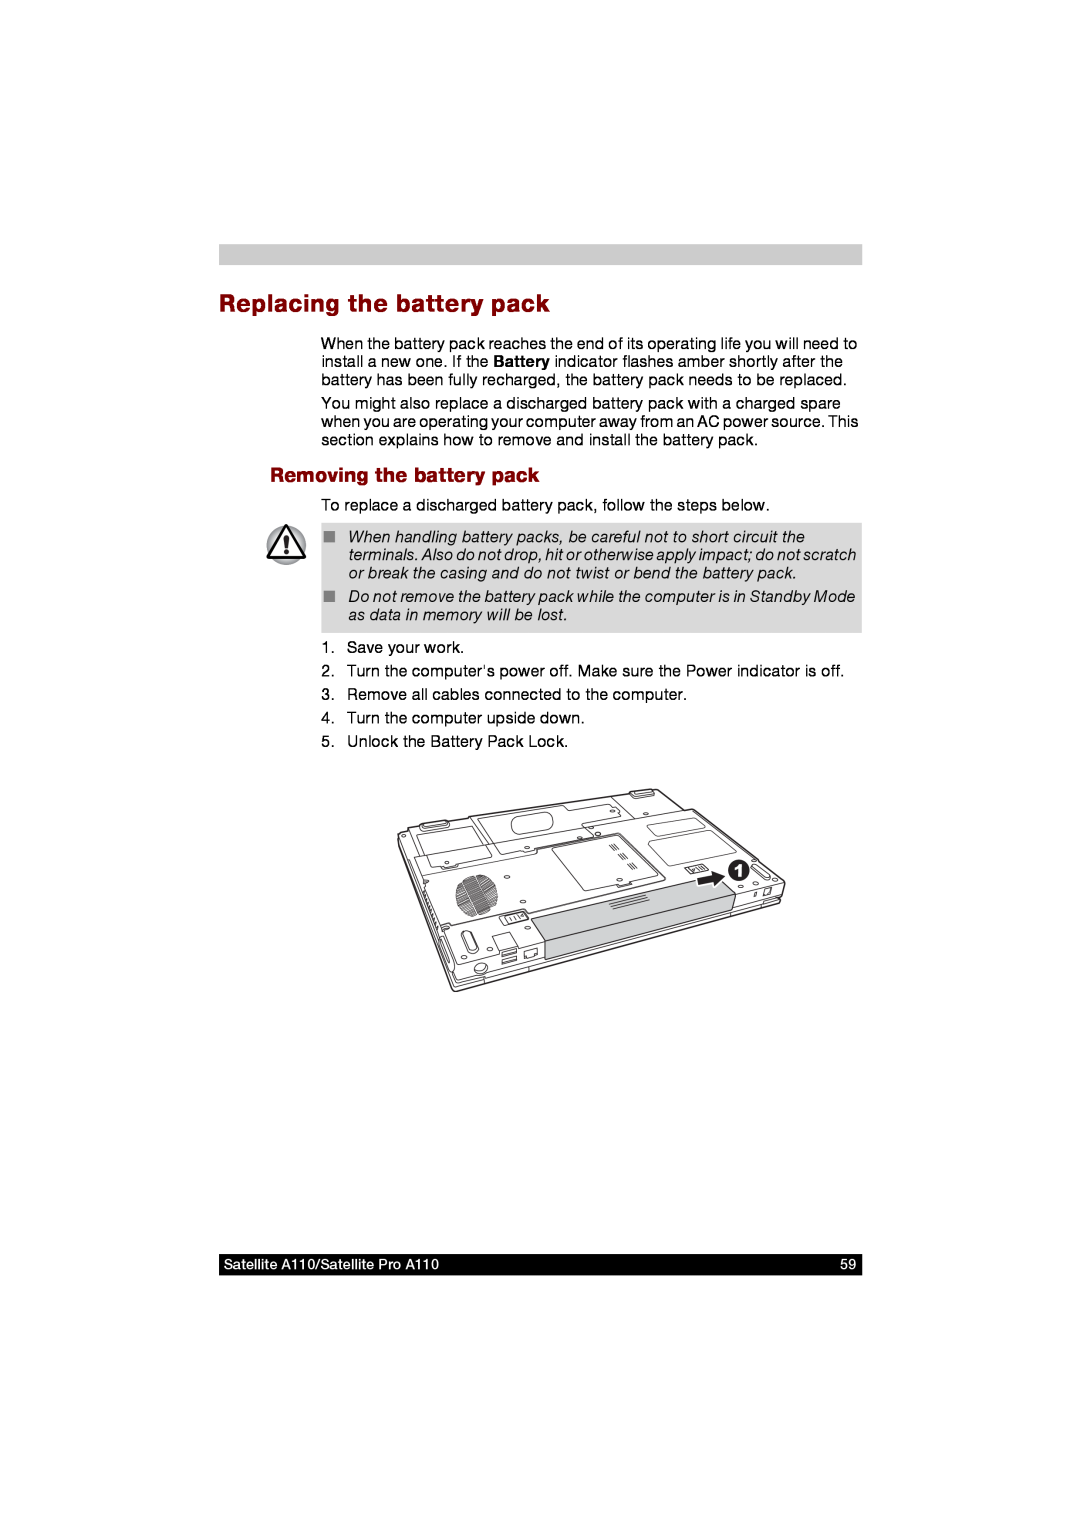 Toshiba A110 user manual Replacing the battery pack, Removing the battery pack 